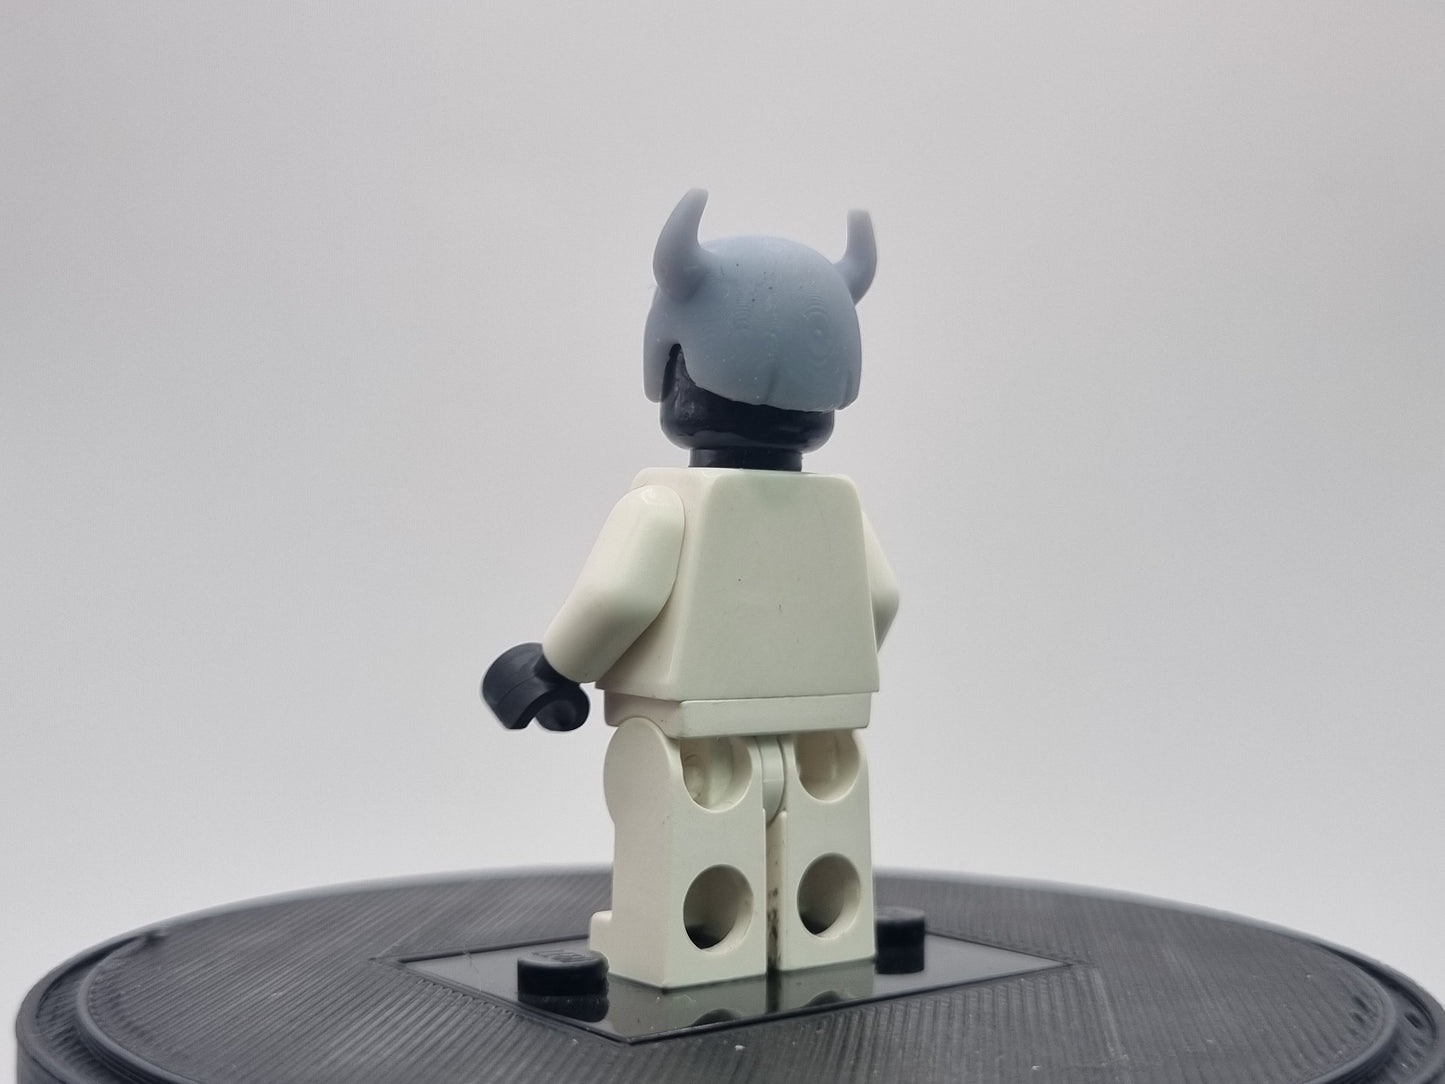 Building toy custom 3D printed small horned hero!